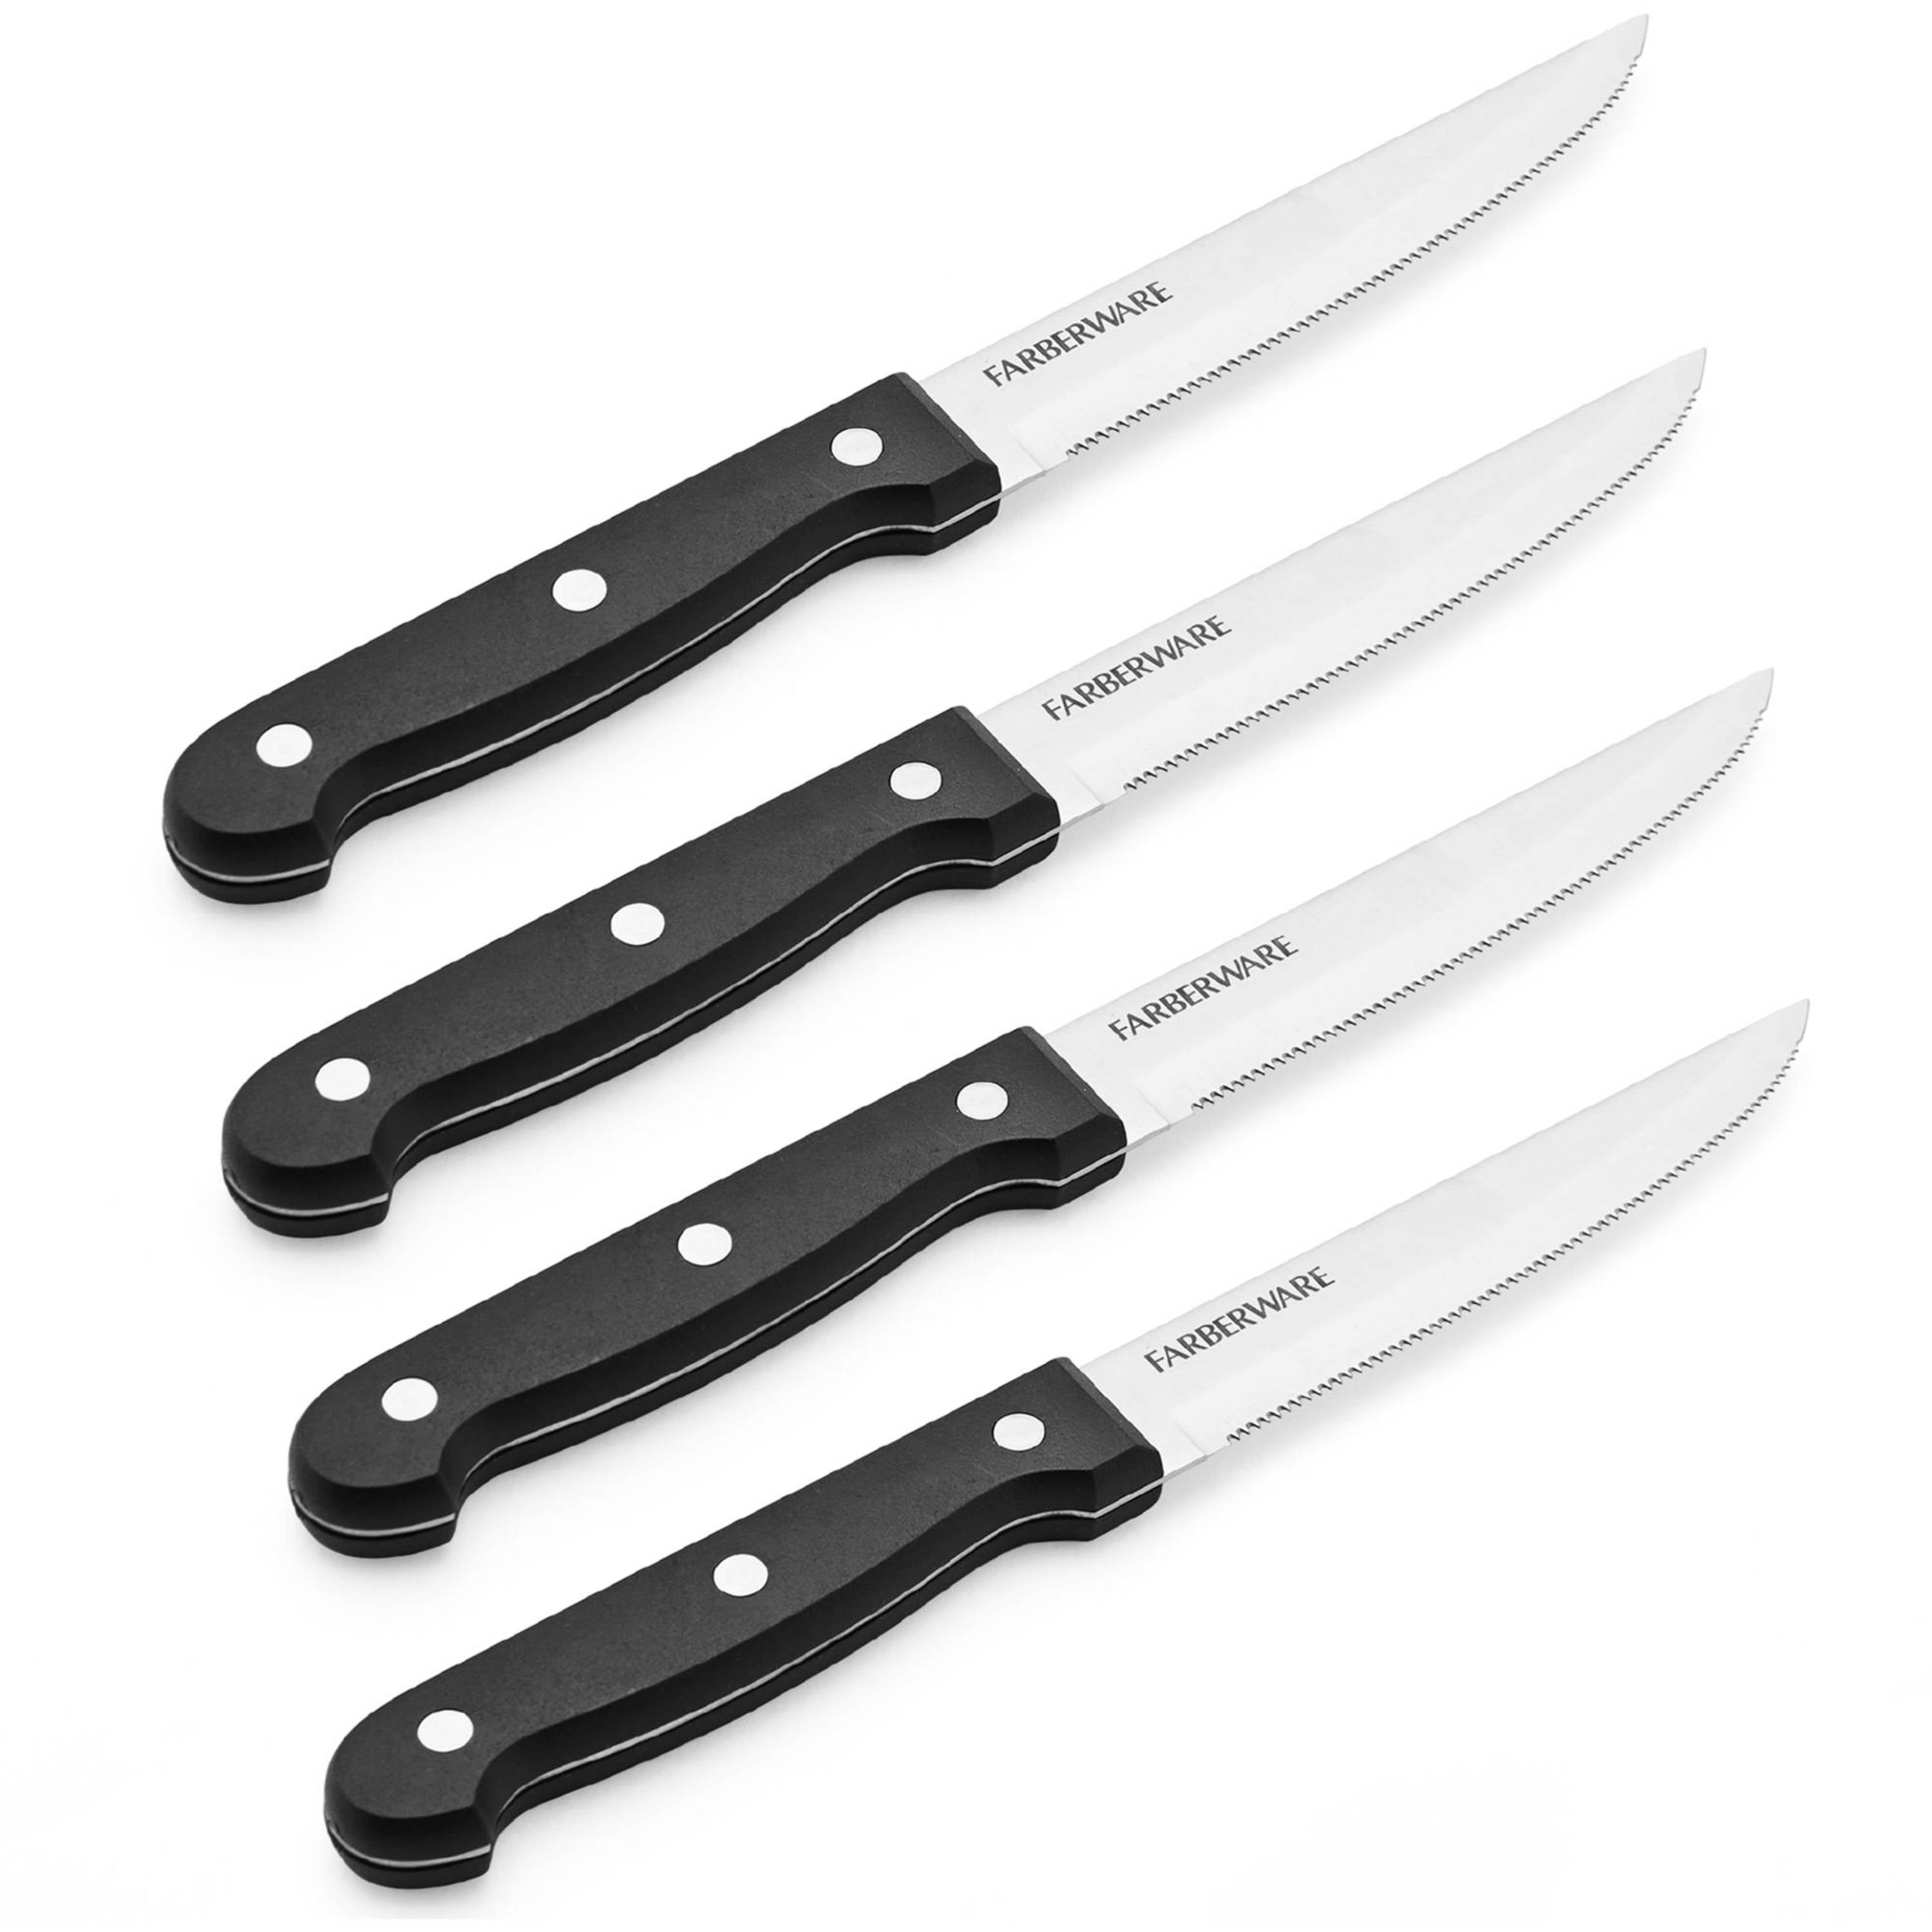 ROGERS PRO-CUT 3 piece KNIFE SET KNIVES * NEVER NEEDS SHARPENED